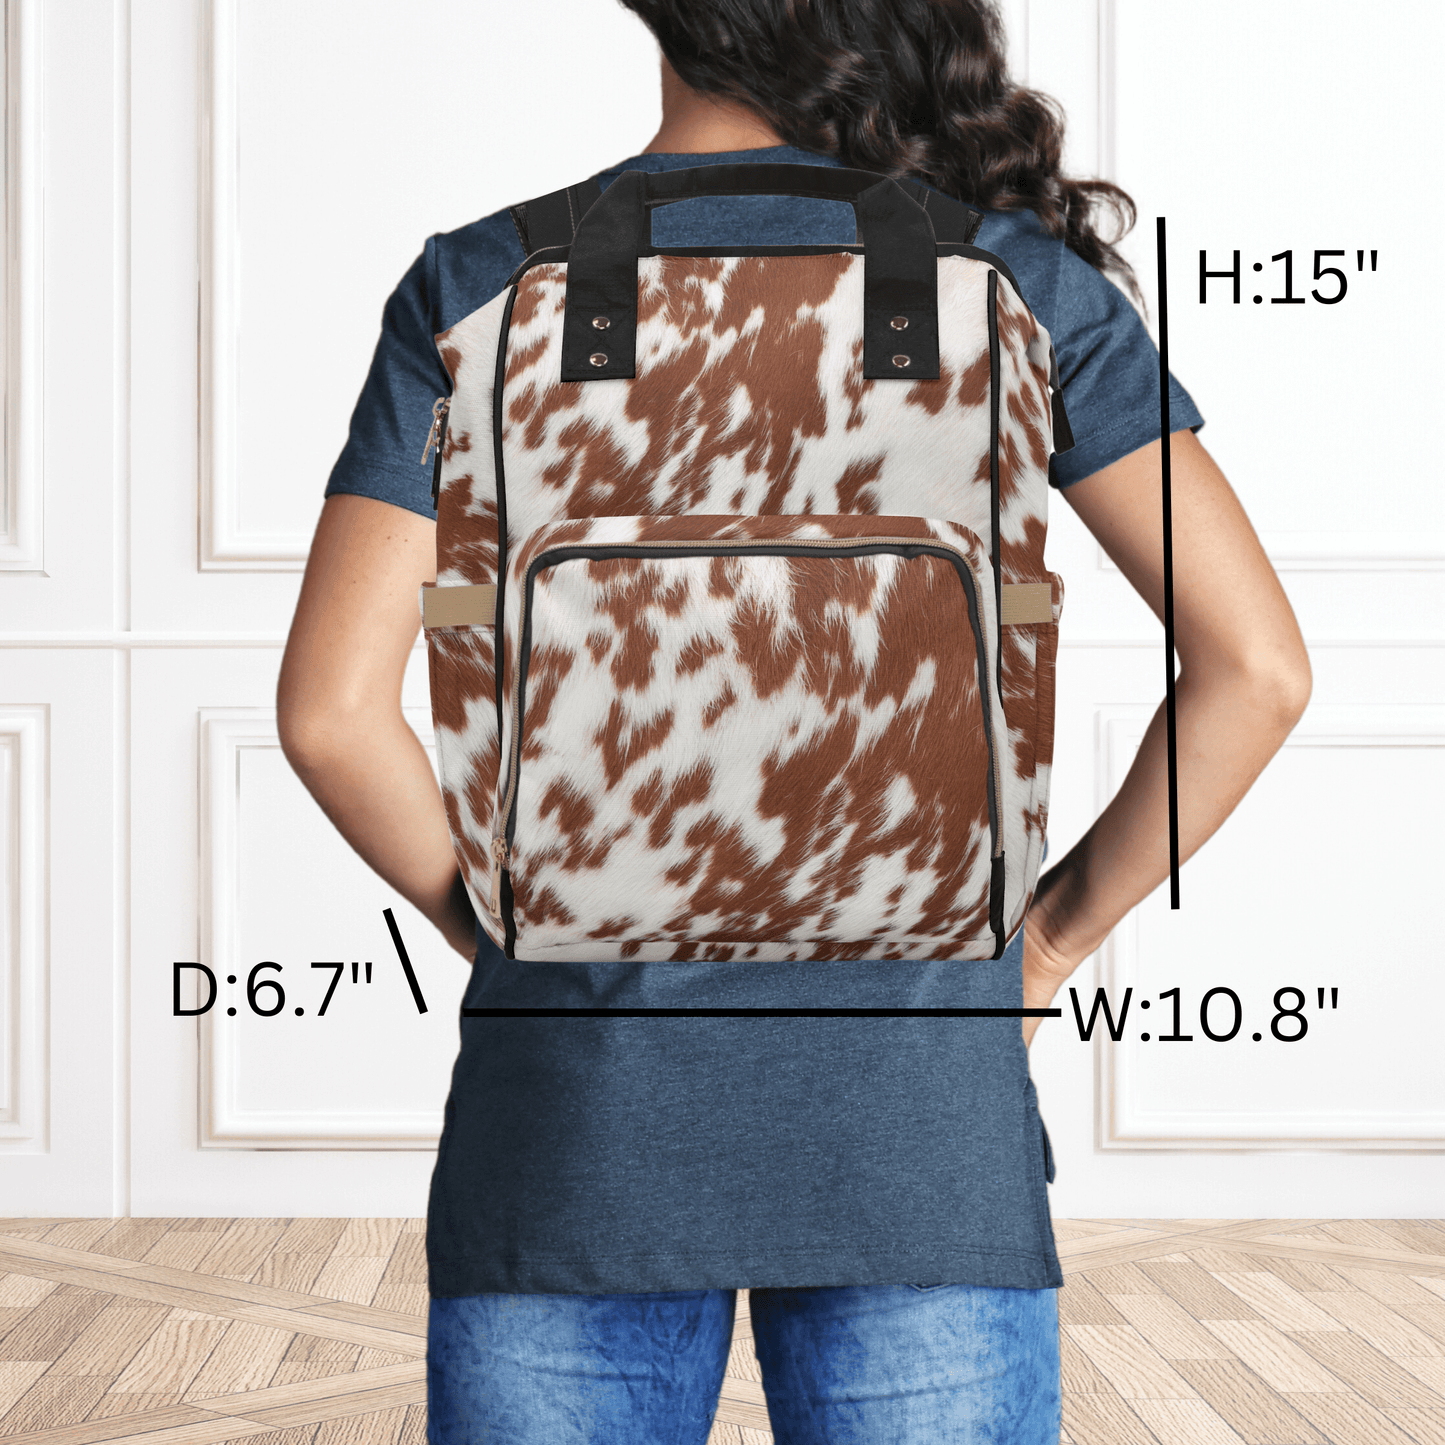 The western diaper bag is shown wearing as a backpack and shows the height depth and width of the backpack.